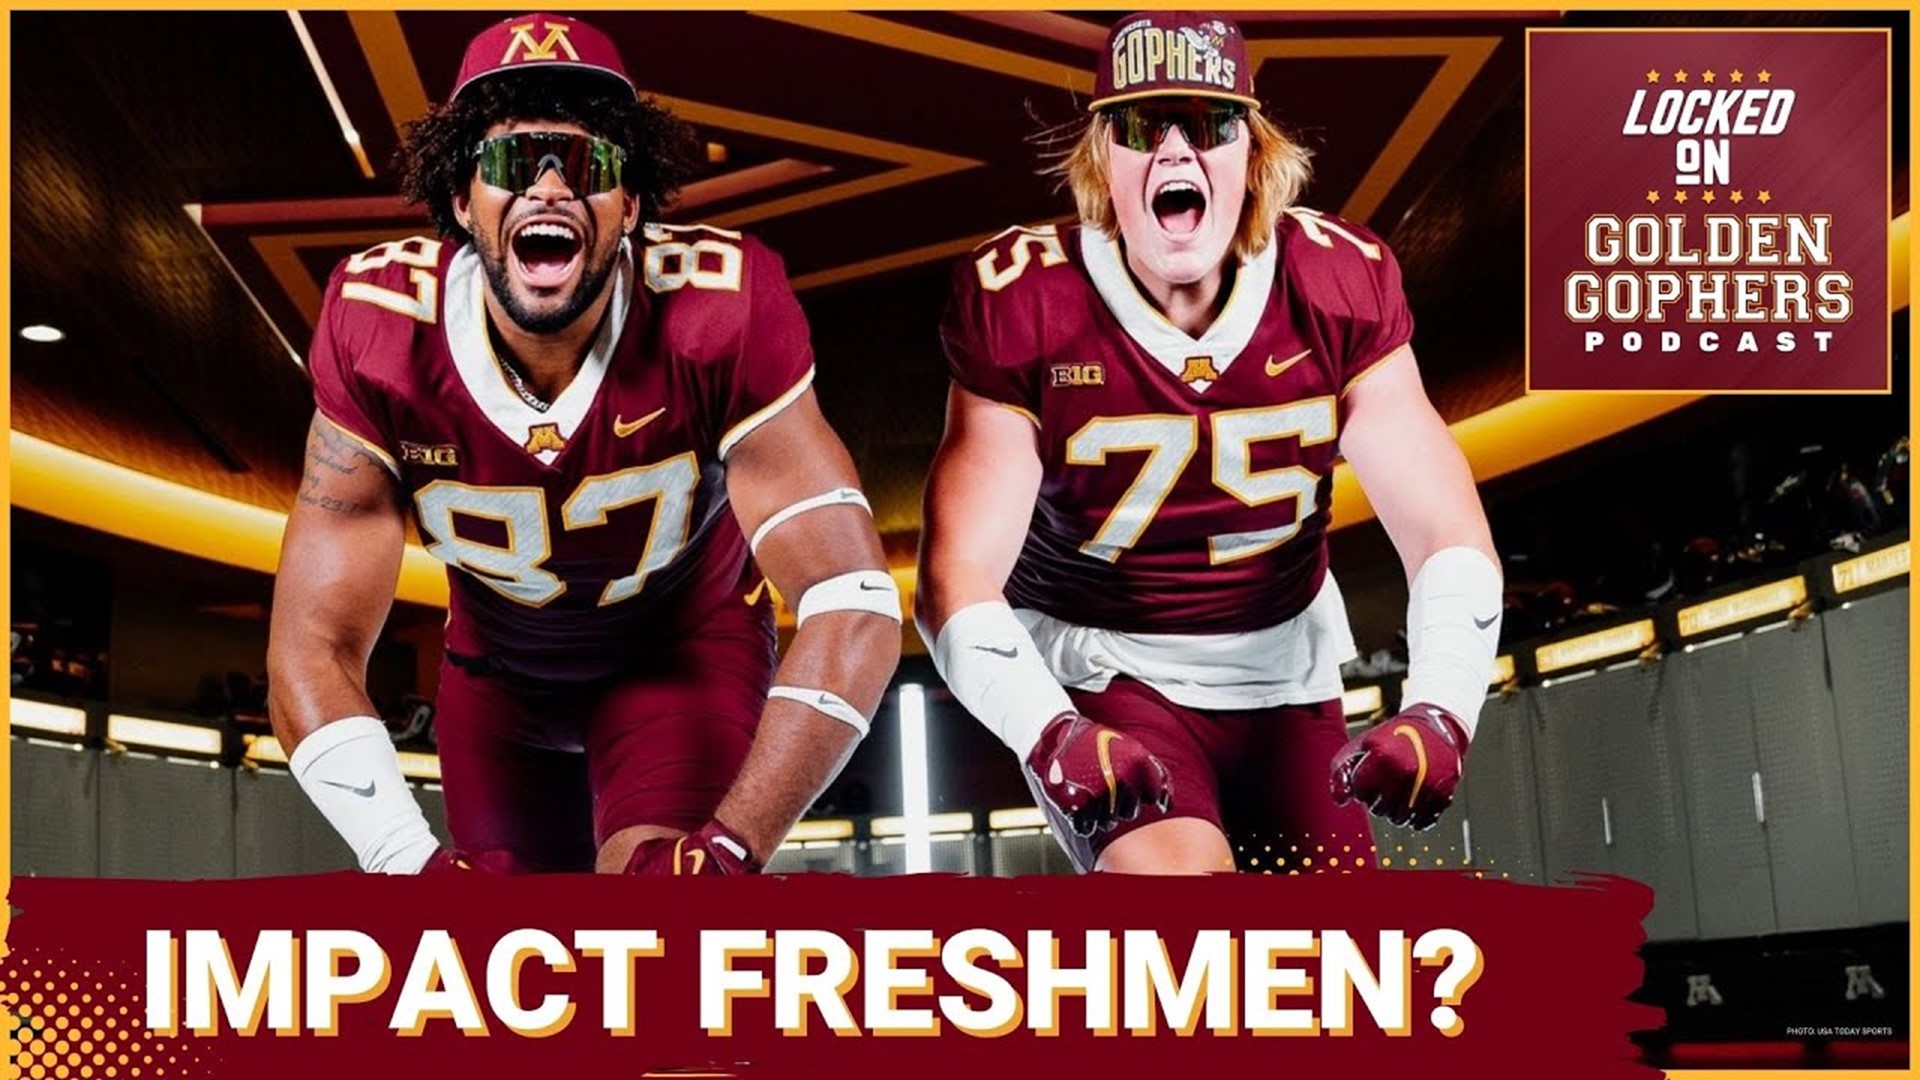 On today's show of Locked On Golden Gophers, we discuss the players who have made an impact during PJ Fleck's tenure and on average how many freshmen play